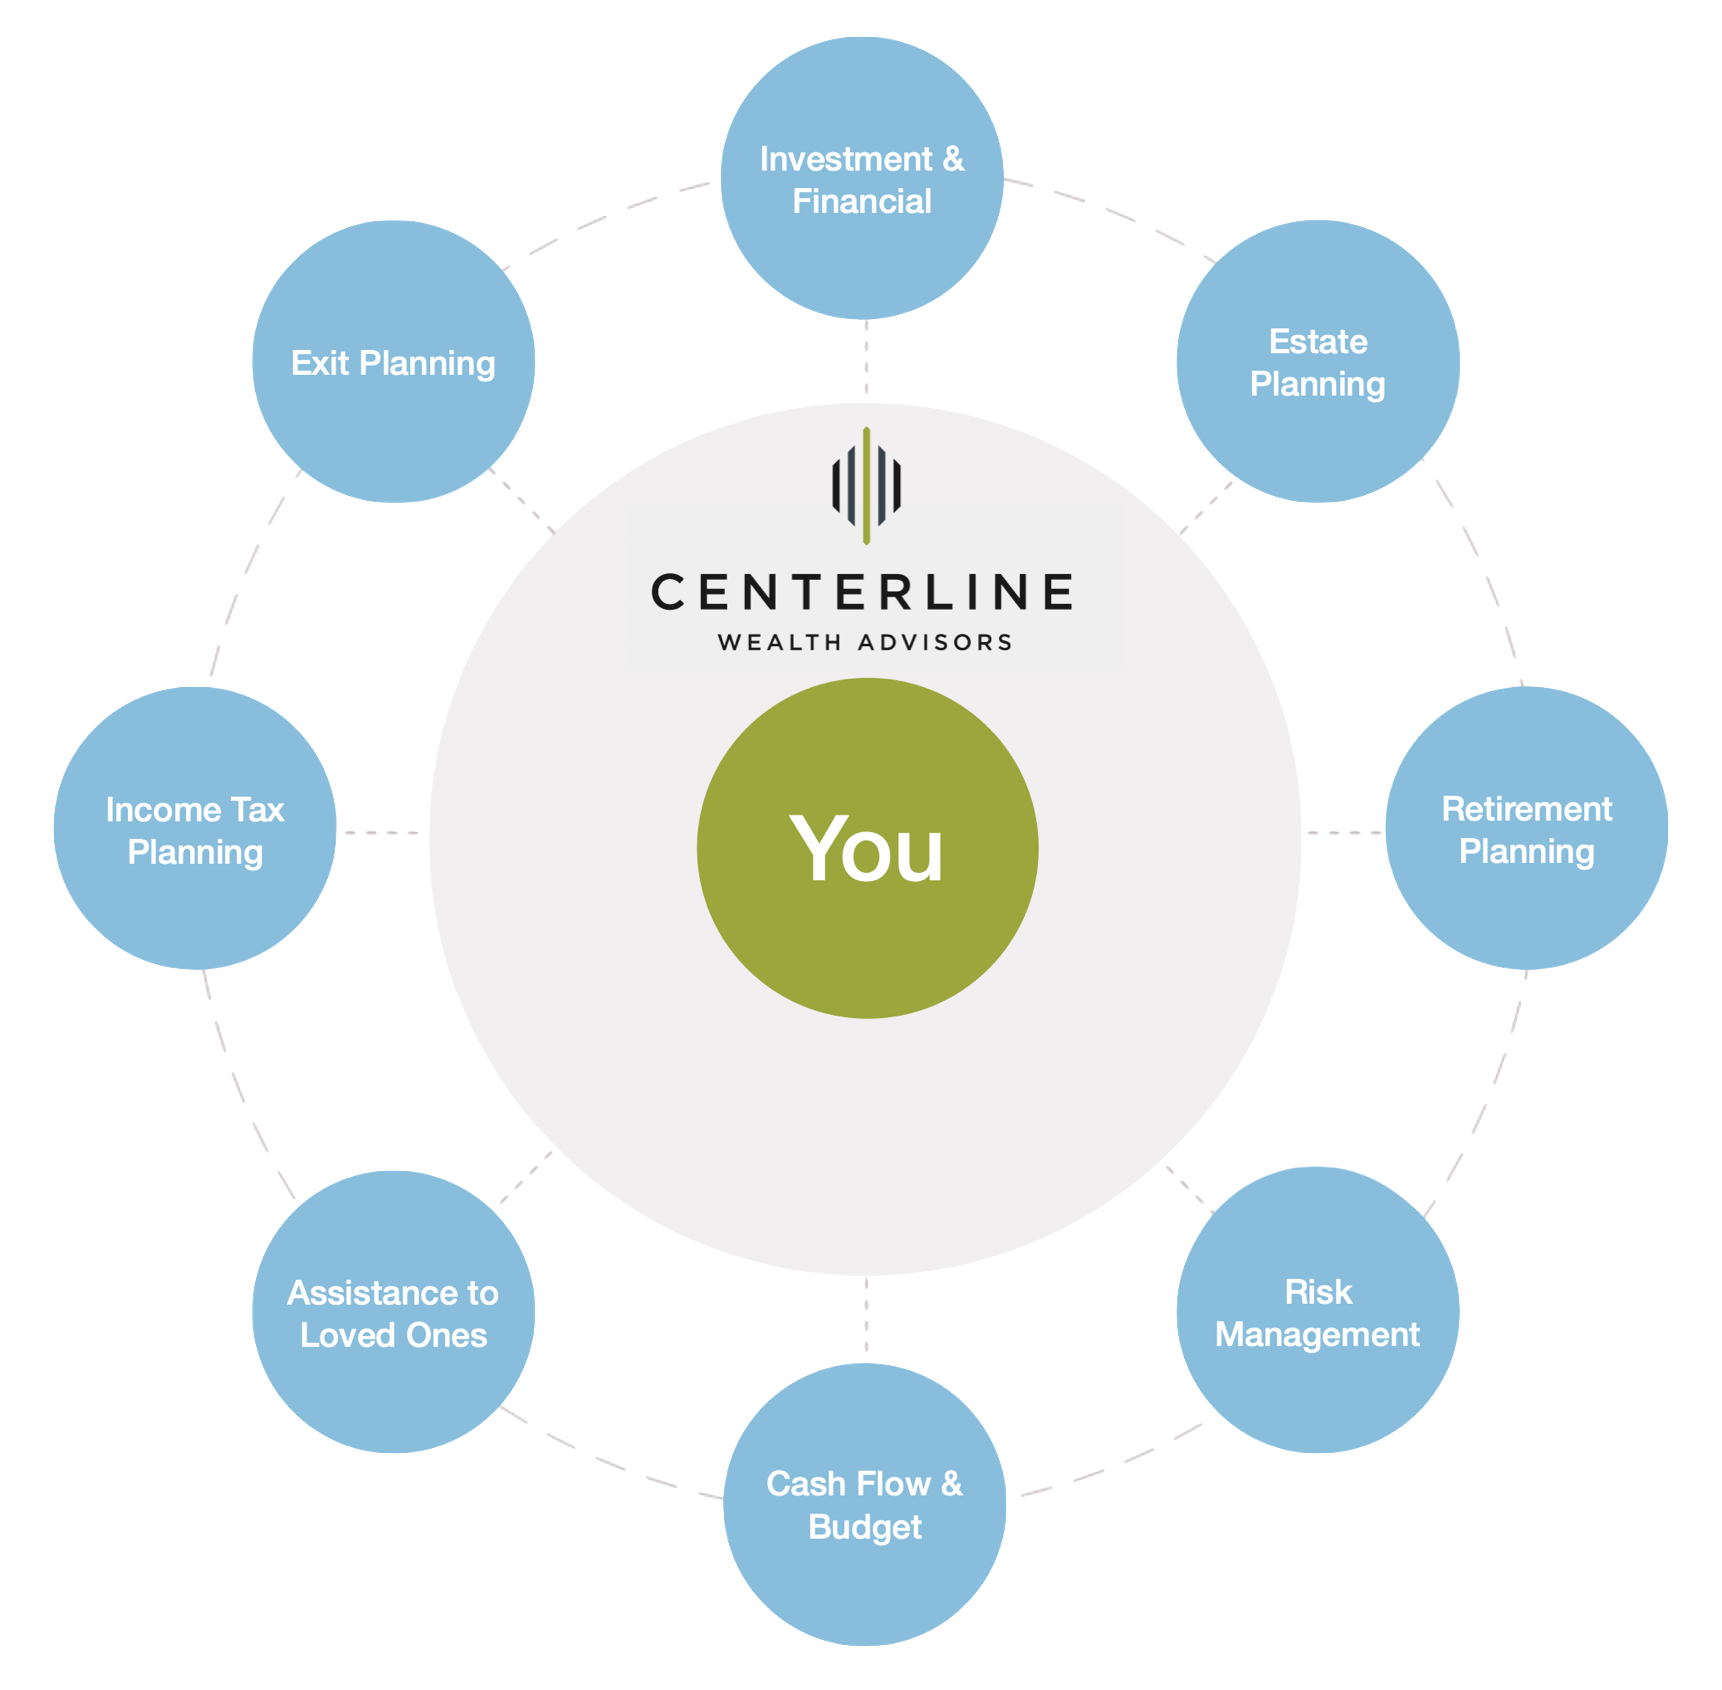 Centerline's areas of expertise include investment and financial, estate planning, retirement planning, risk management, cash flow and budget, assistance to loved ones, income tax planning, and exit planning.